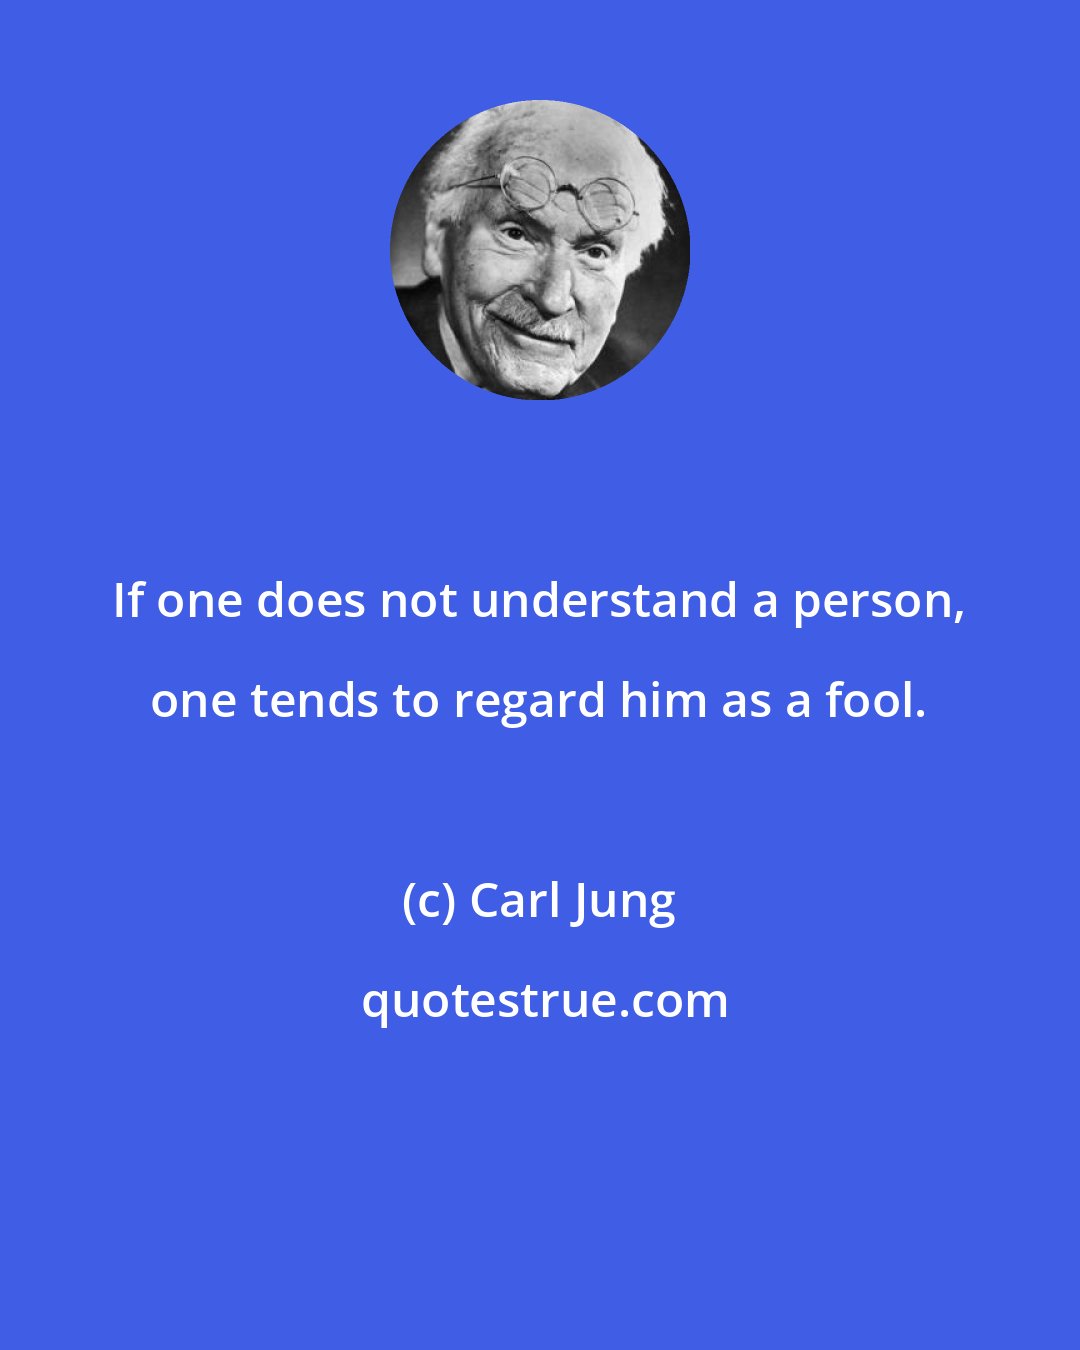 Carl Jung: If one does not understand a person, one tends to regard him as a fool.